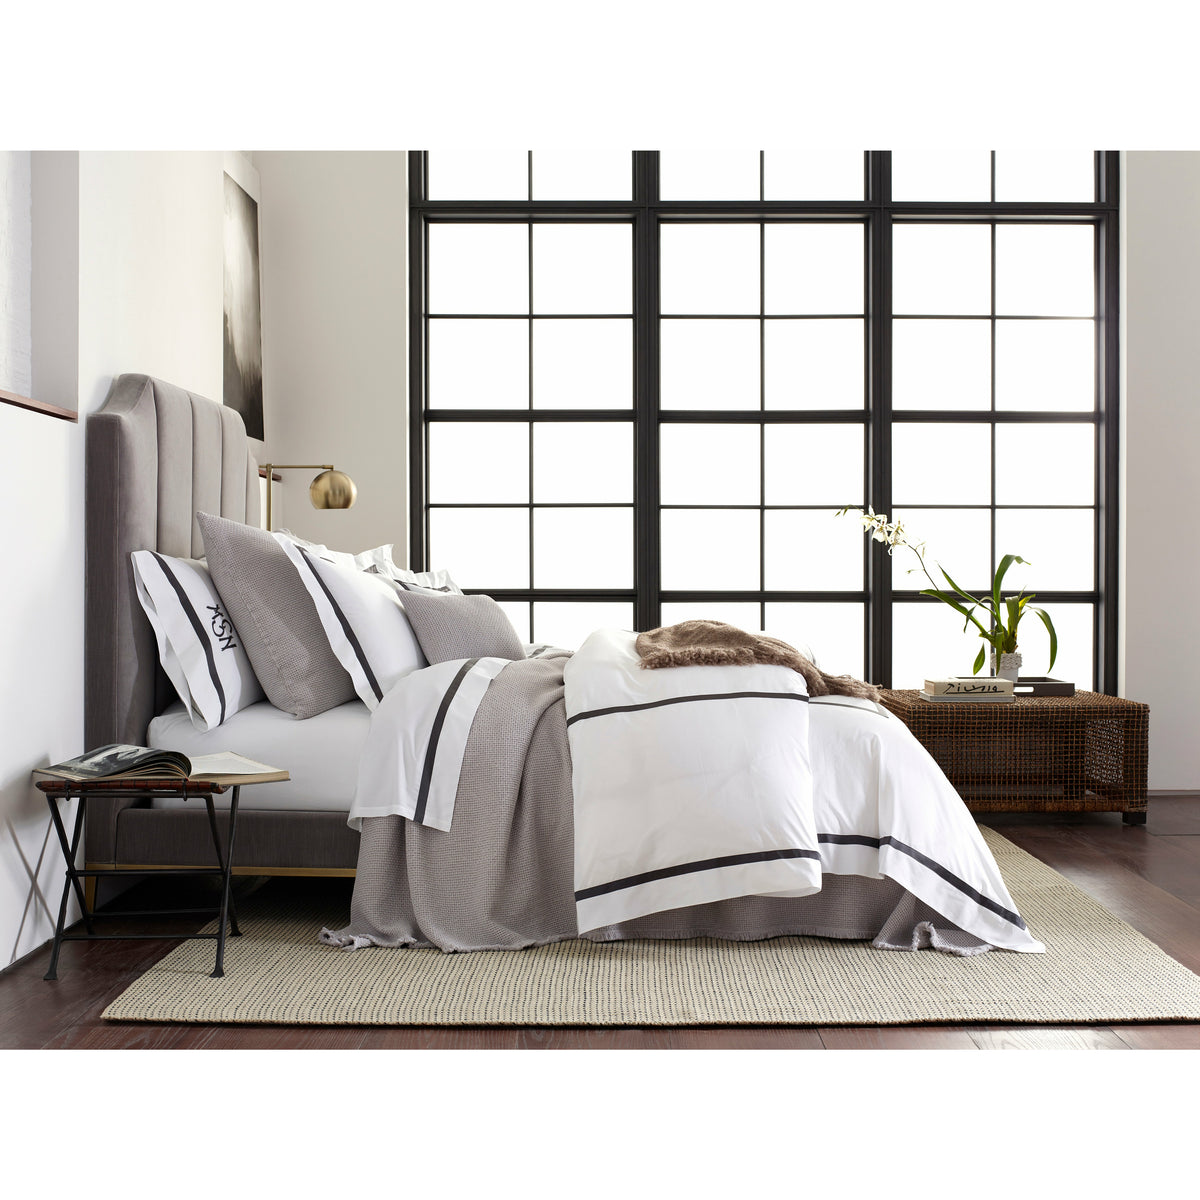 Matouk Lowell Bedding Collection With Selah Fine Linens